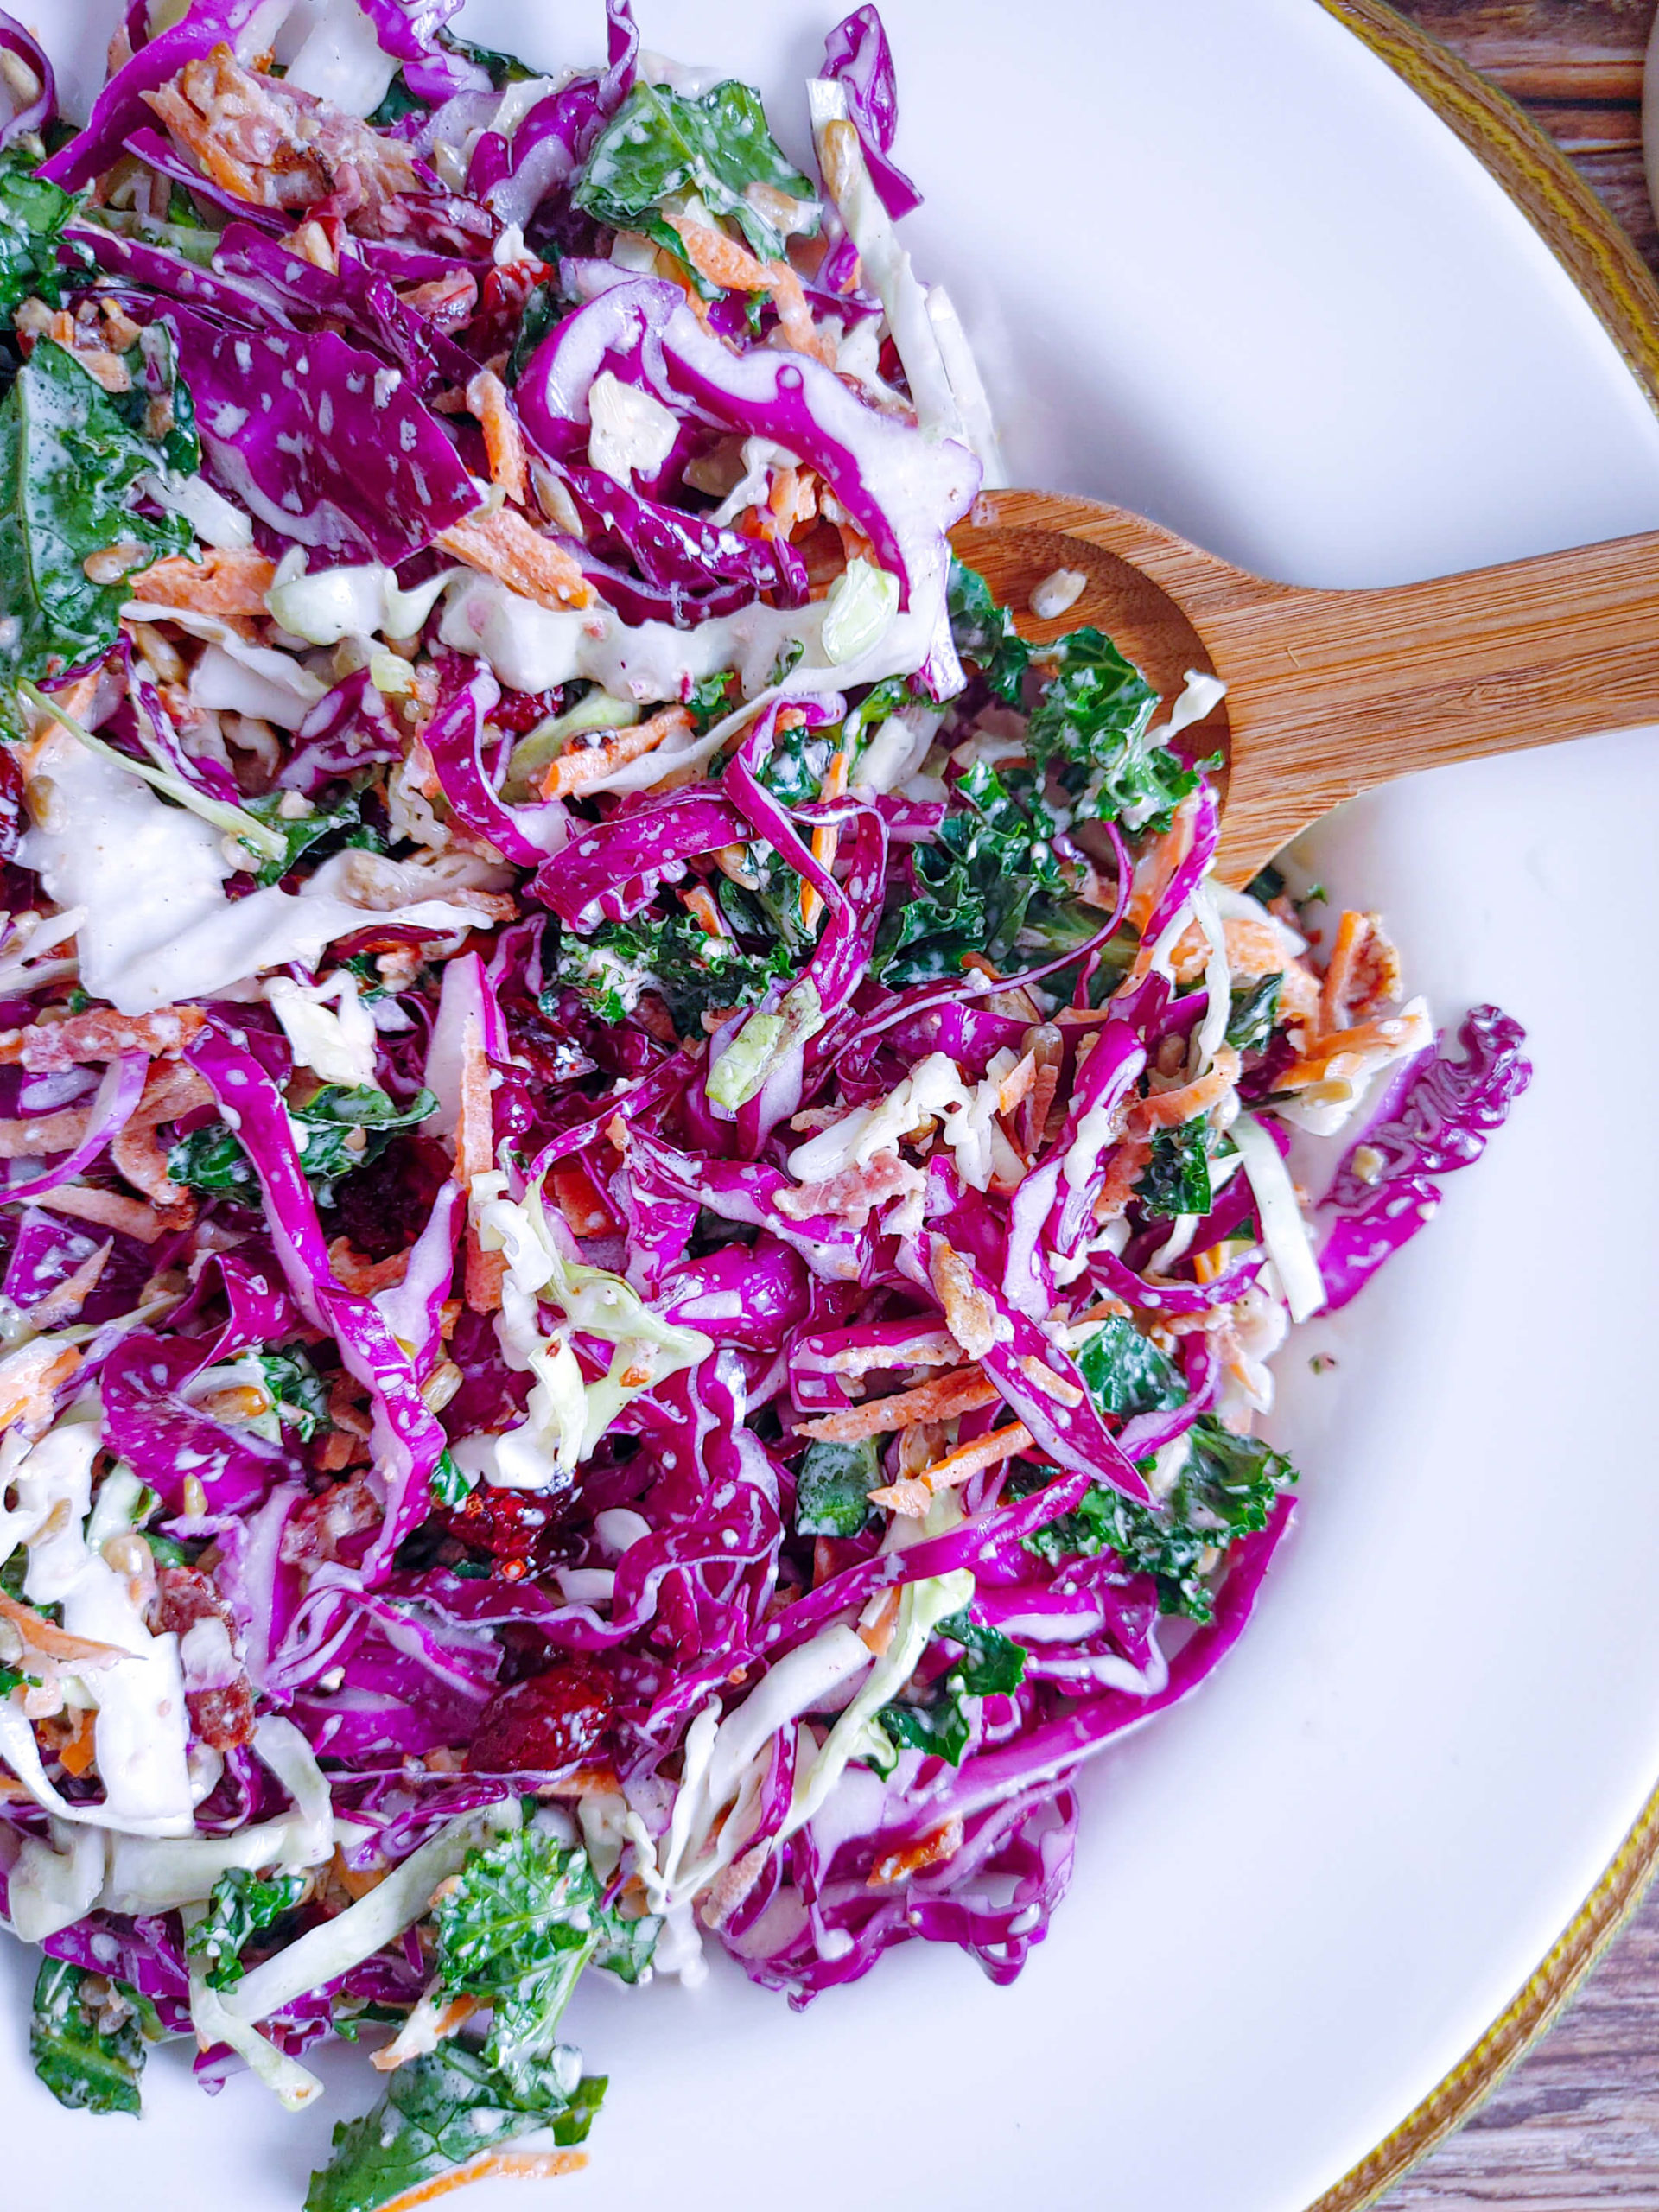 TOSSED RED CABBAGE SALAD